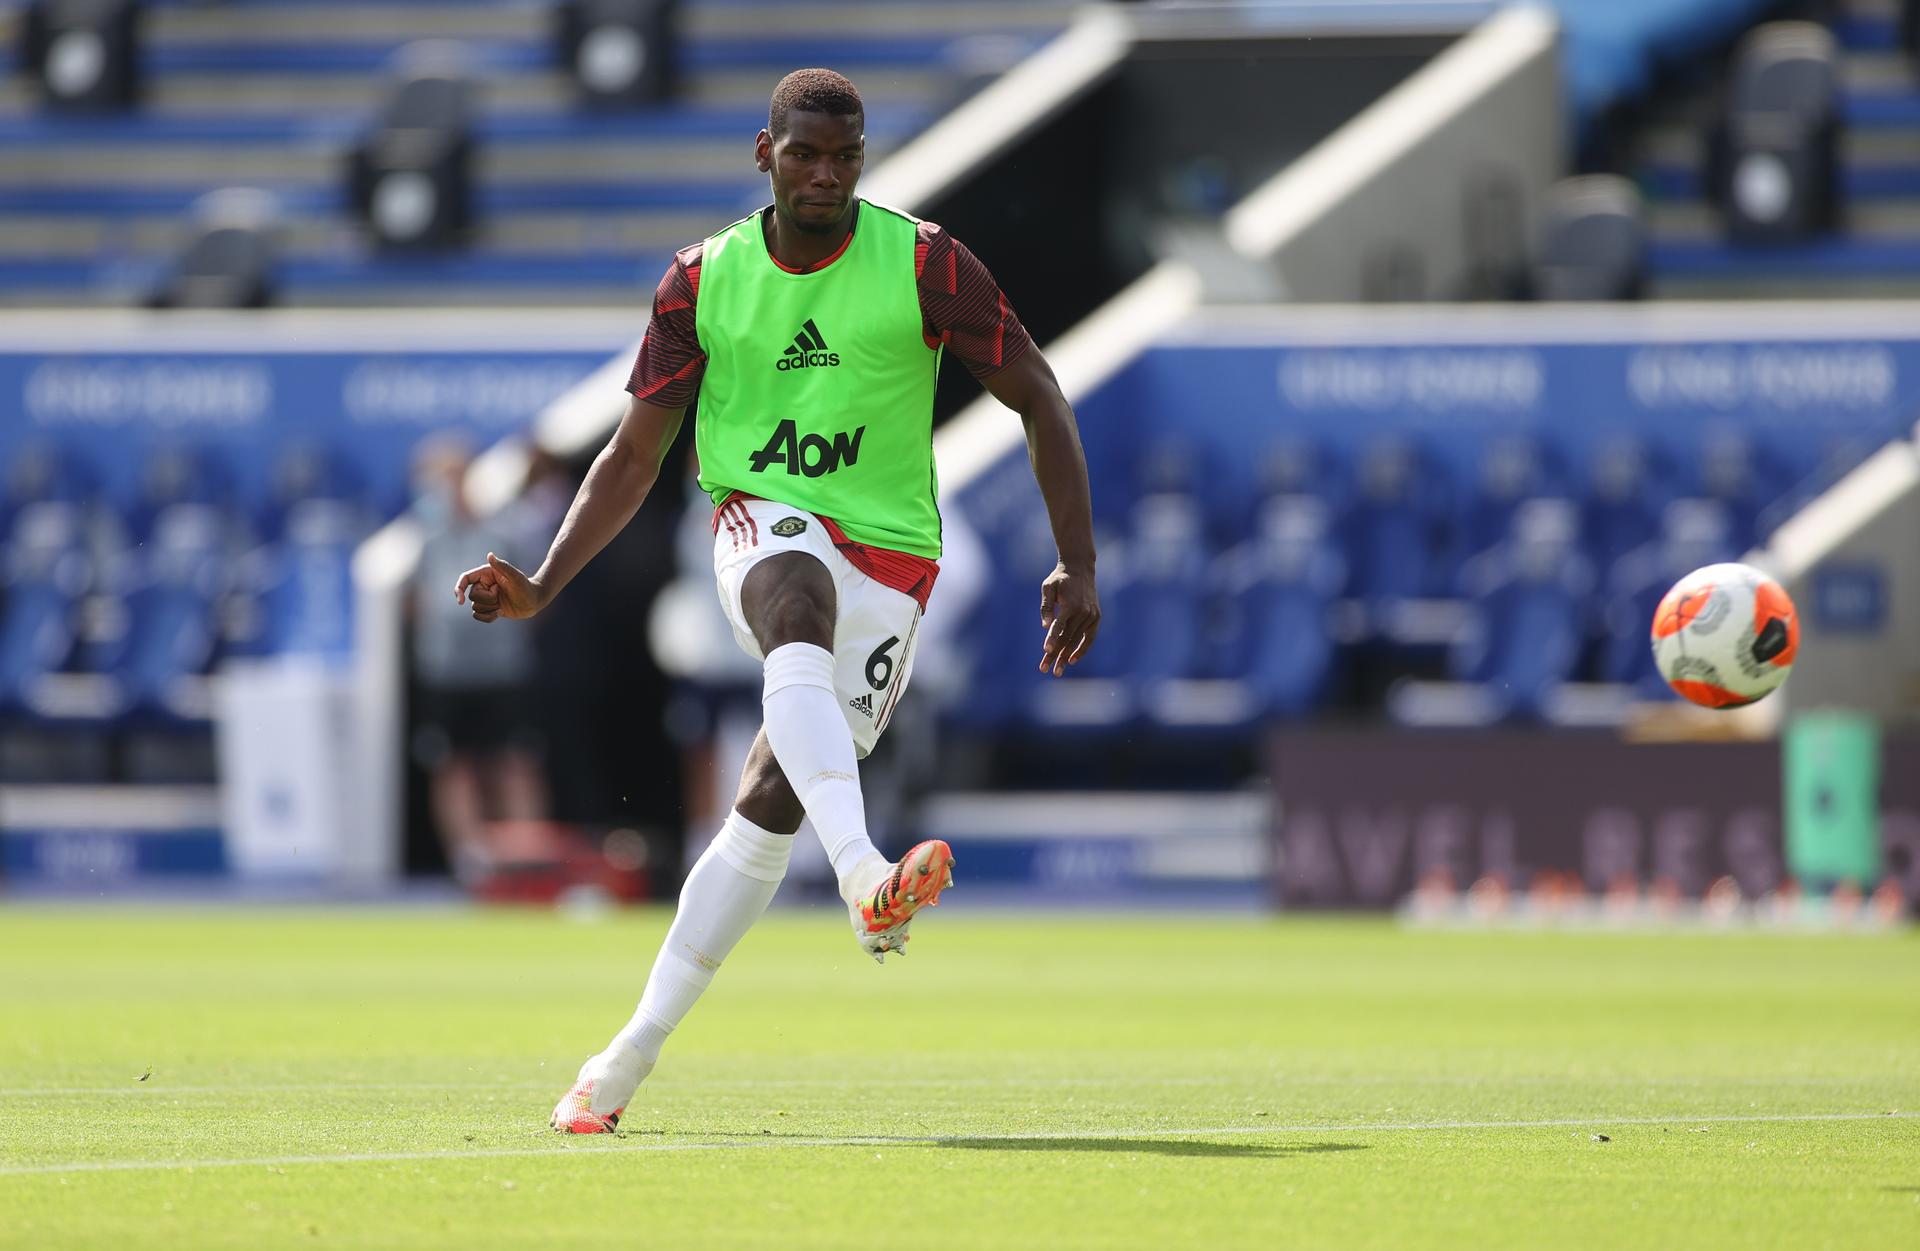 Pogba left out of France squad after testing positive for COVID-19